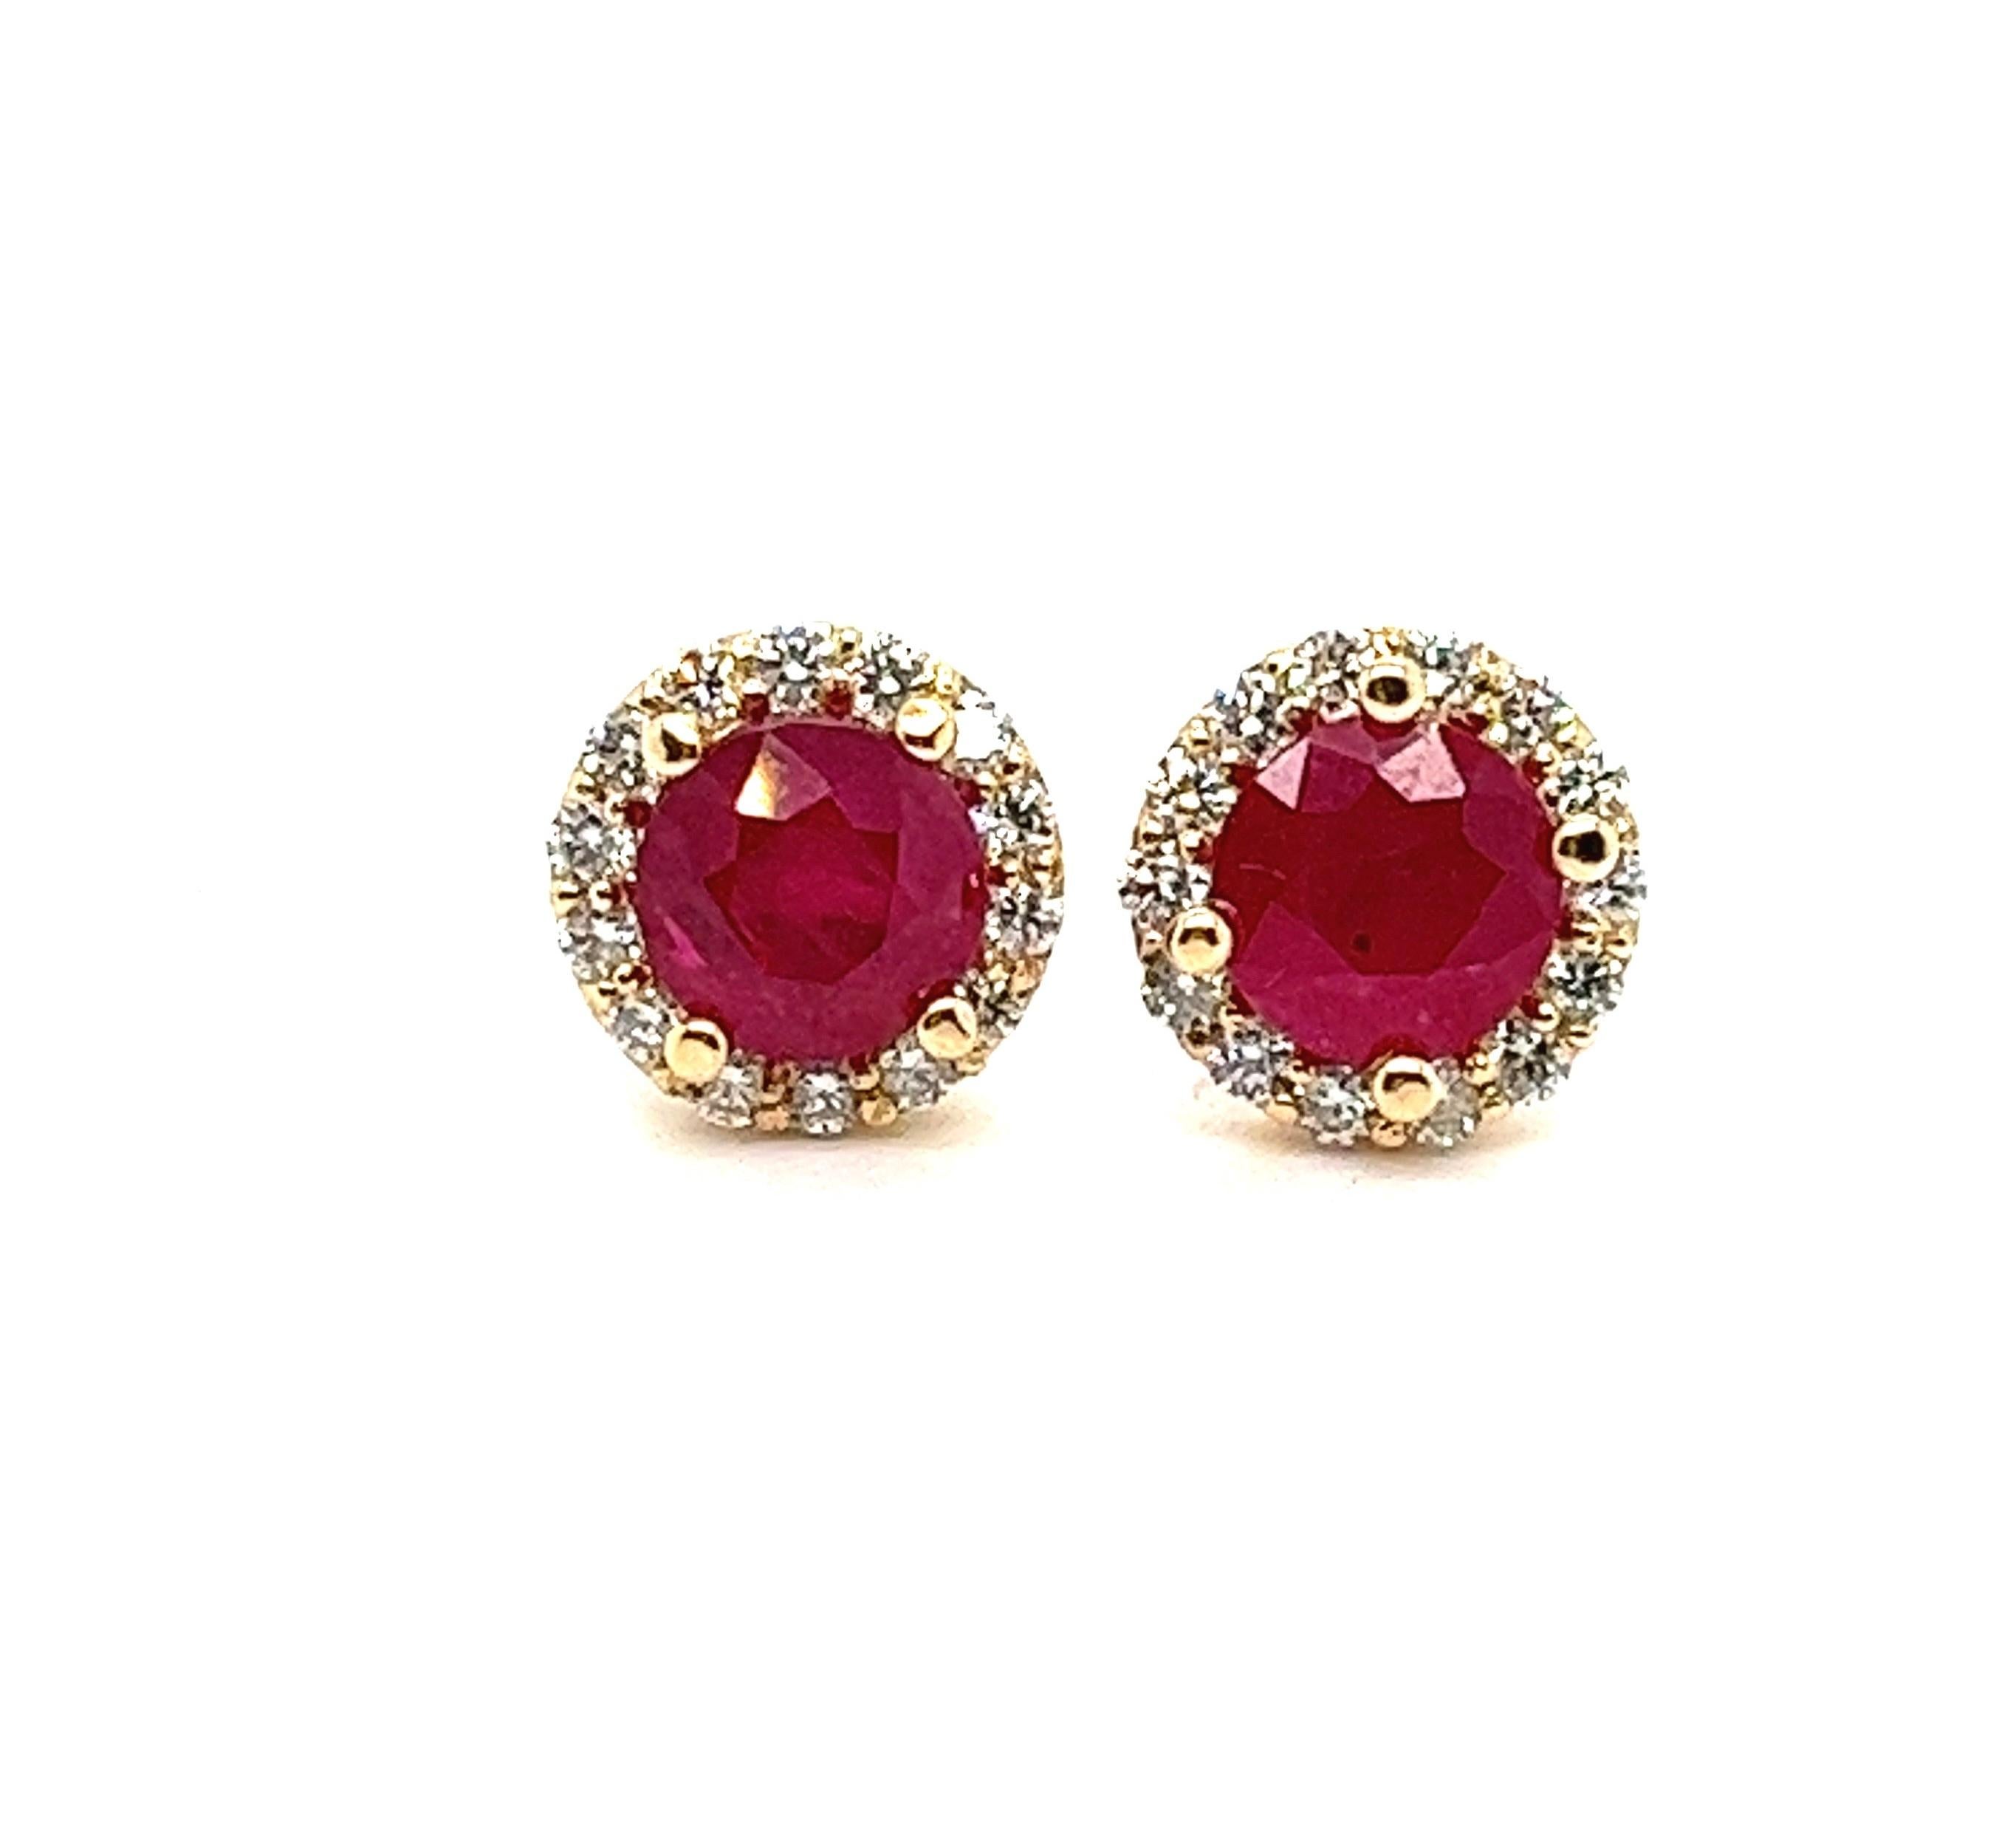 Natural 3 Carat Ruby Diamond Stud Earring, 18 Karat Yellow Gold In New Condition For Sale In Miami, FL